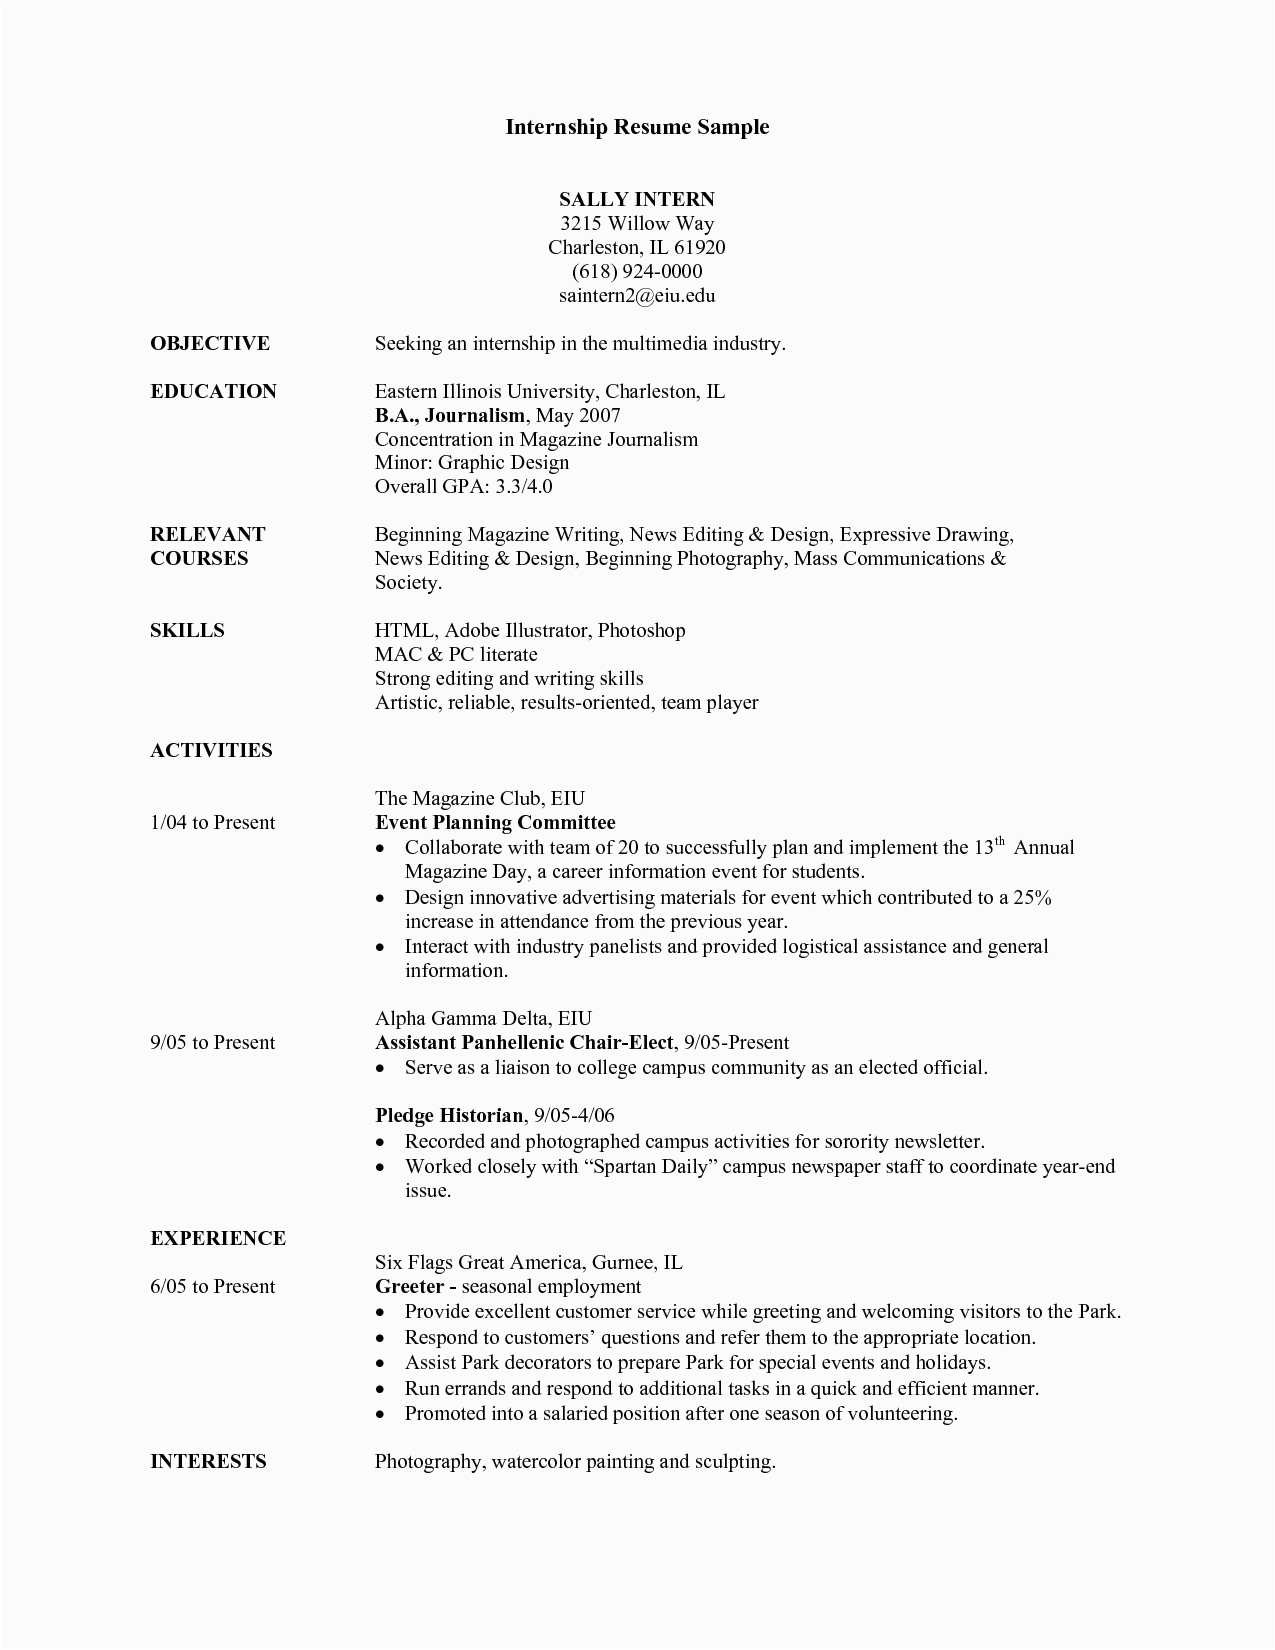 Sample Resume for College Student for Internship College Student Resume for Internship – Task List Templates